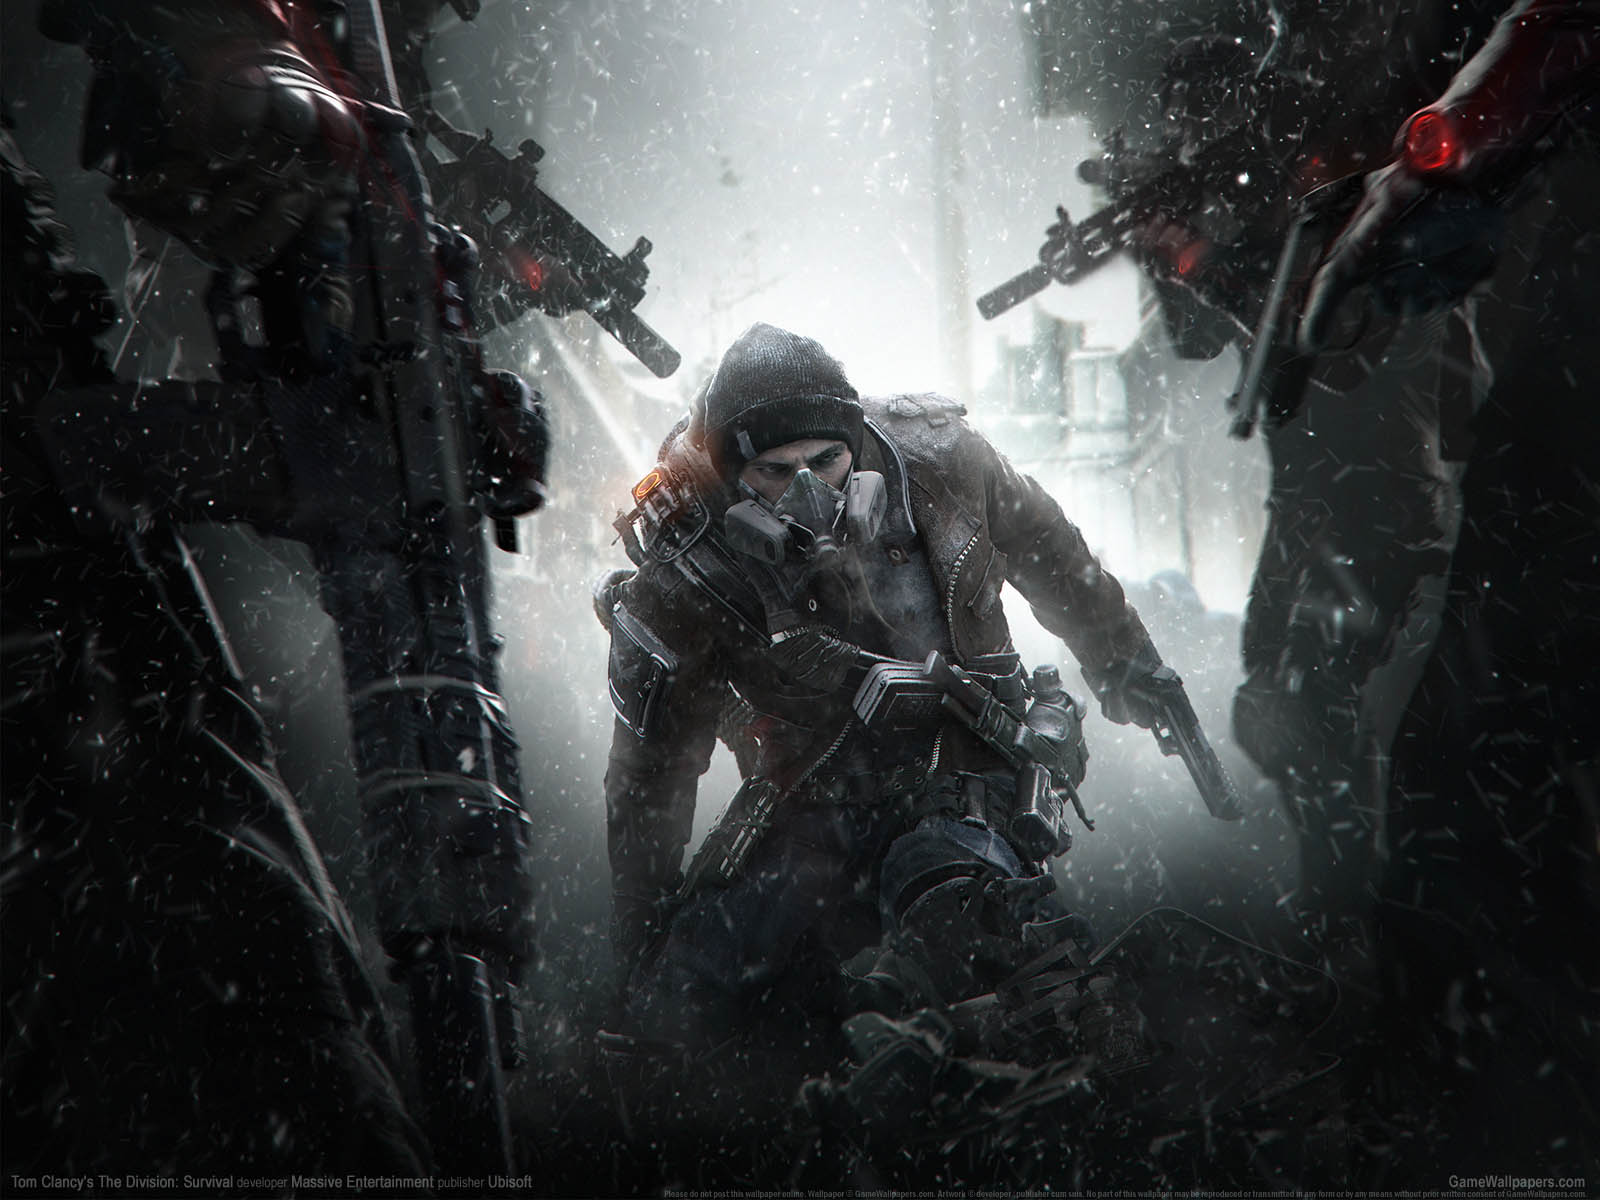 Tom Clancy's The Division: Survivalνmmer=01 fond d'cran  1600x1200